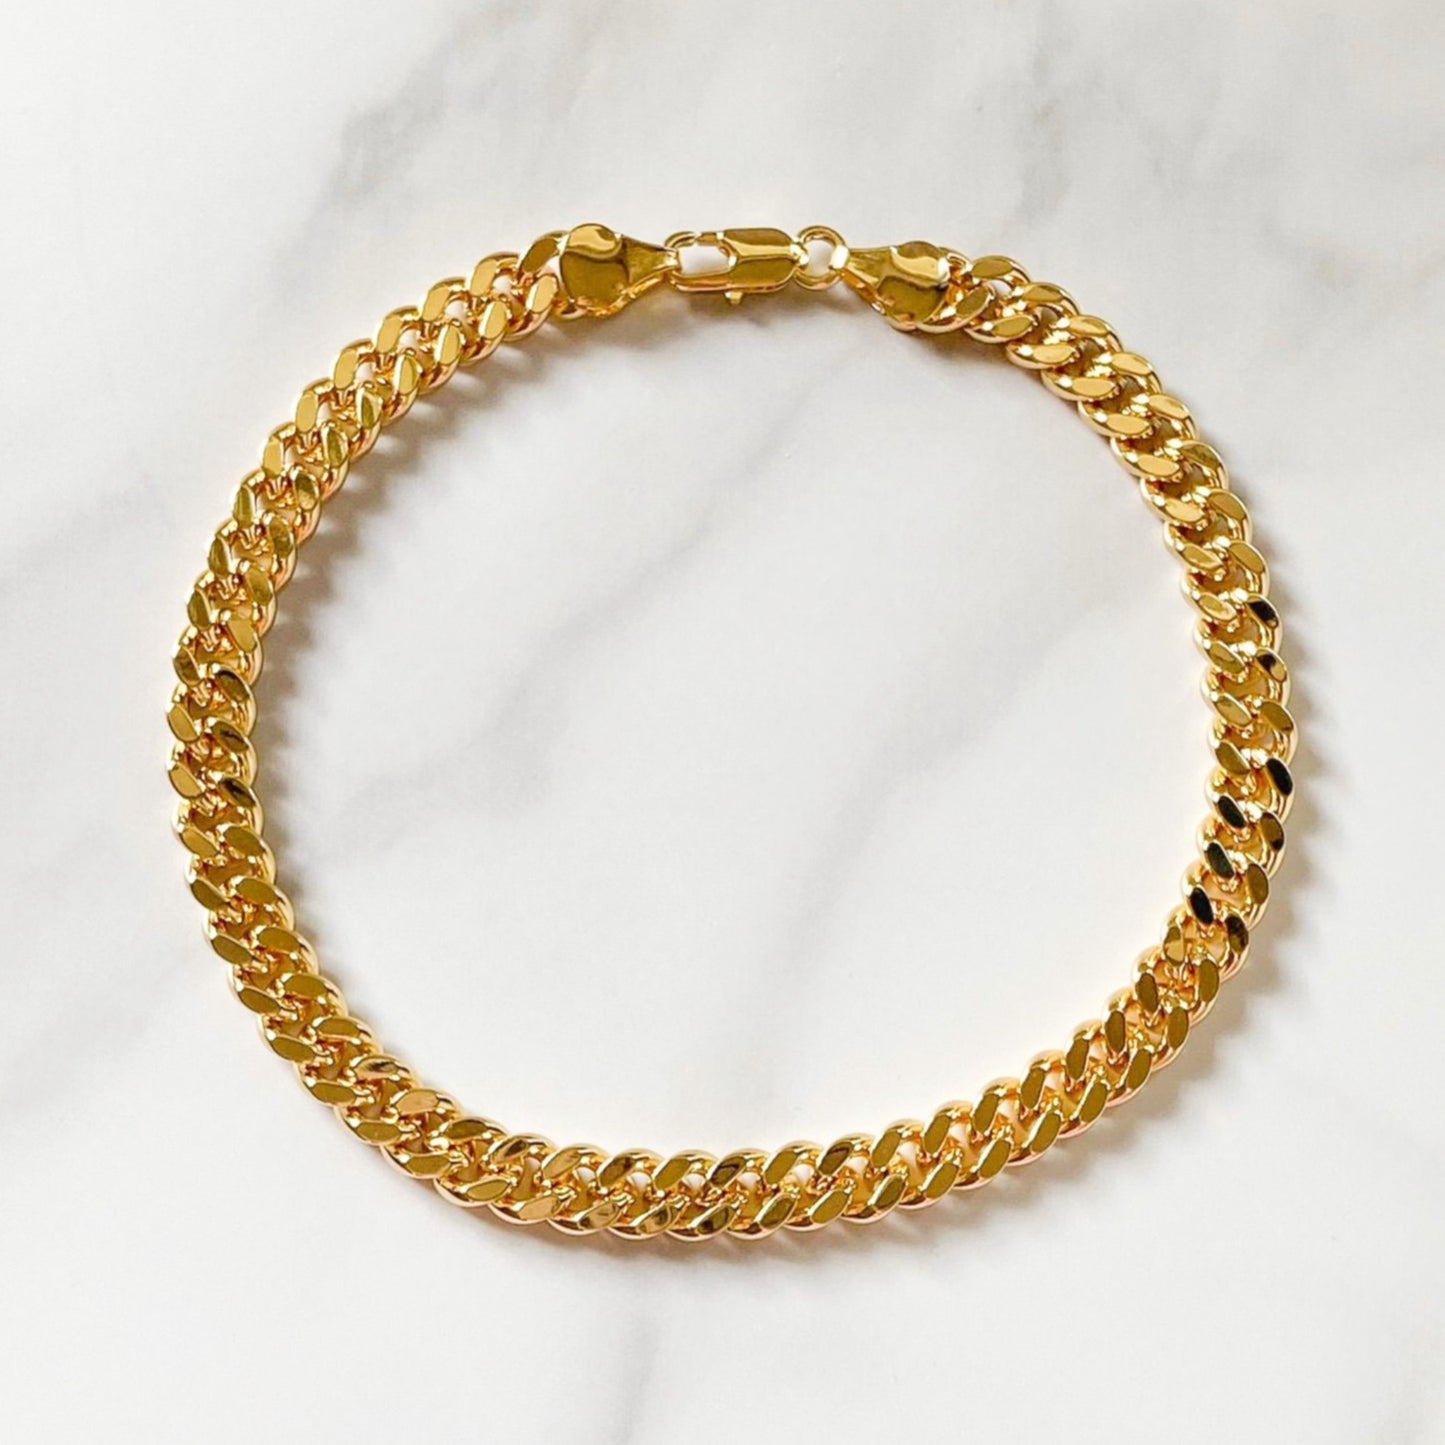 Lili Cuban Link gold-filled anklet (11") by ISVI Boutique Miami. Water-resistant and hypoallergenic. Matched with a pairs of white sneakers.